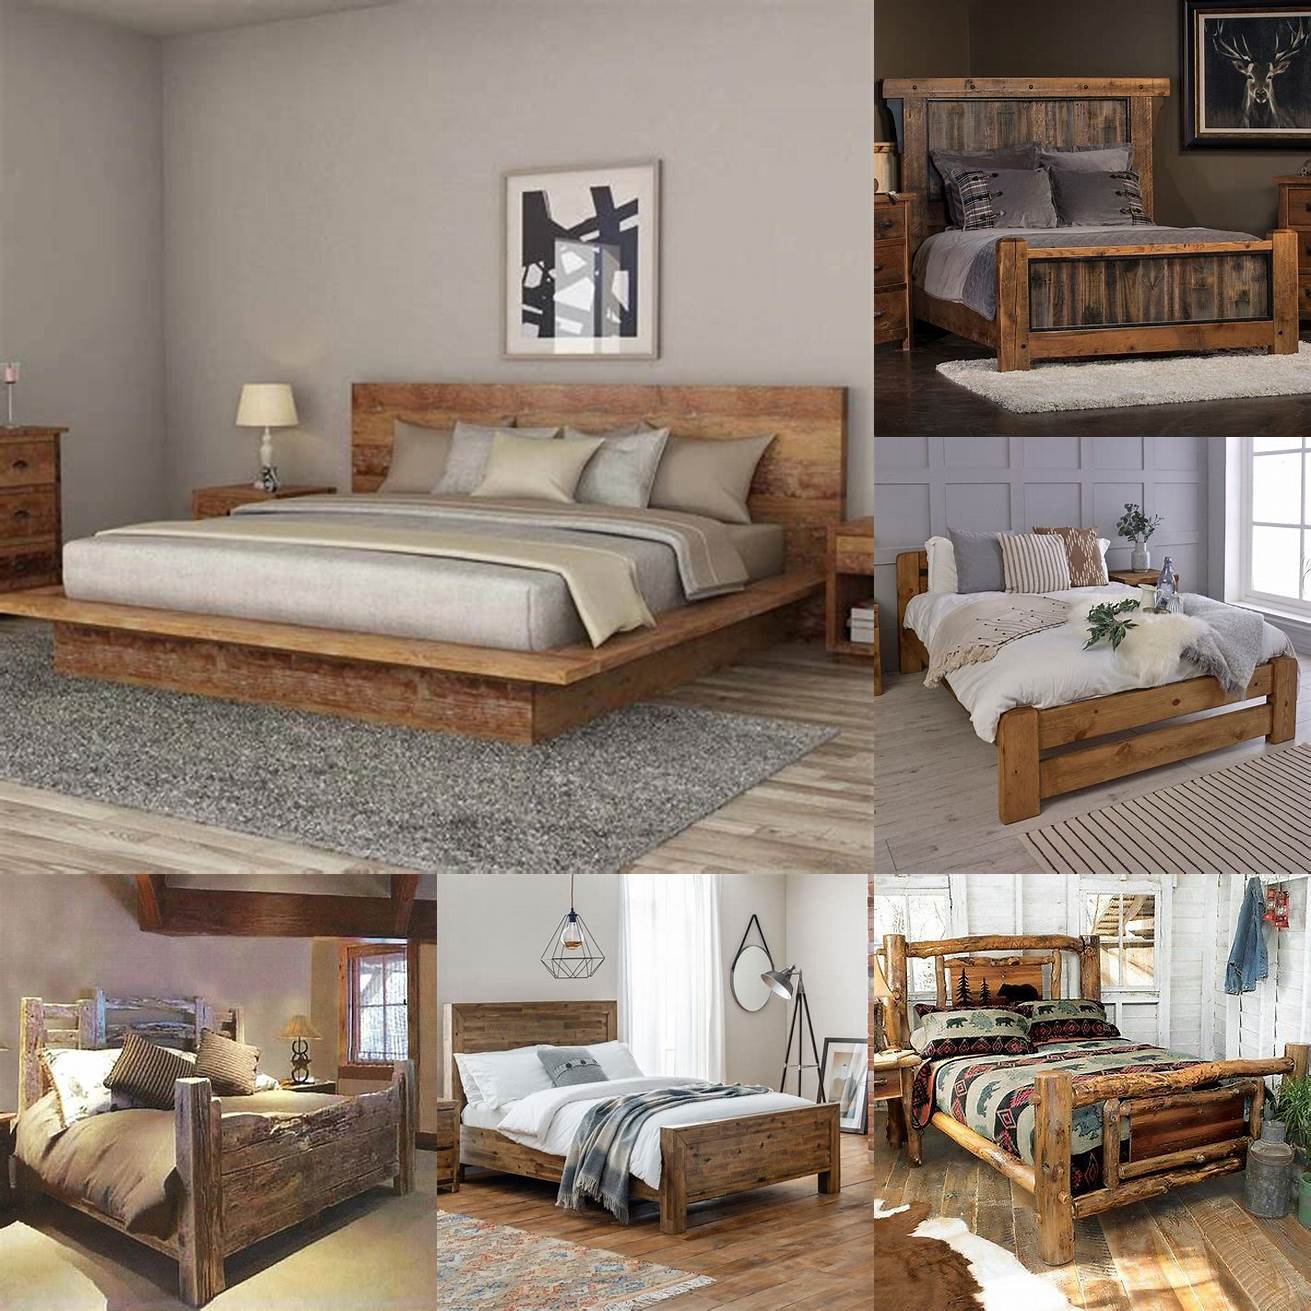 This rustic wooden bed frame adds warmth and texture to this bedroom